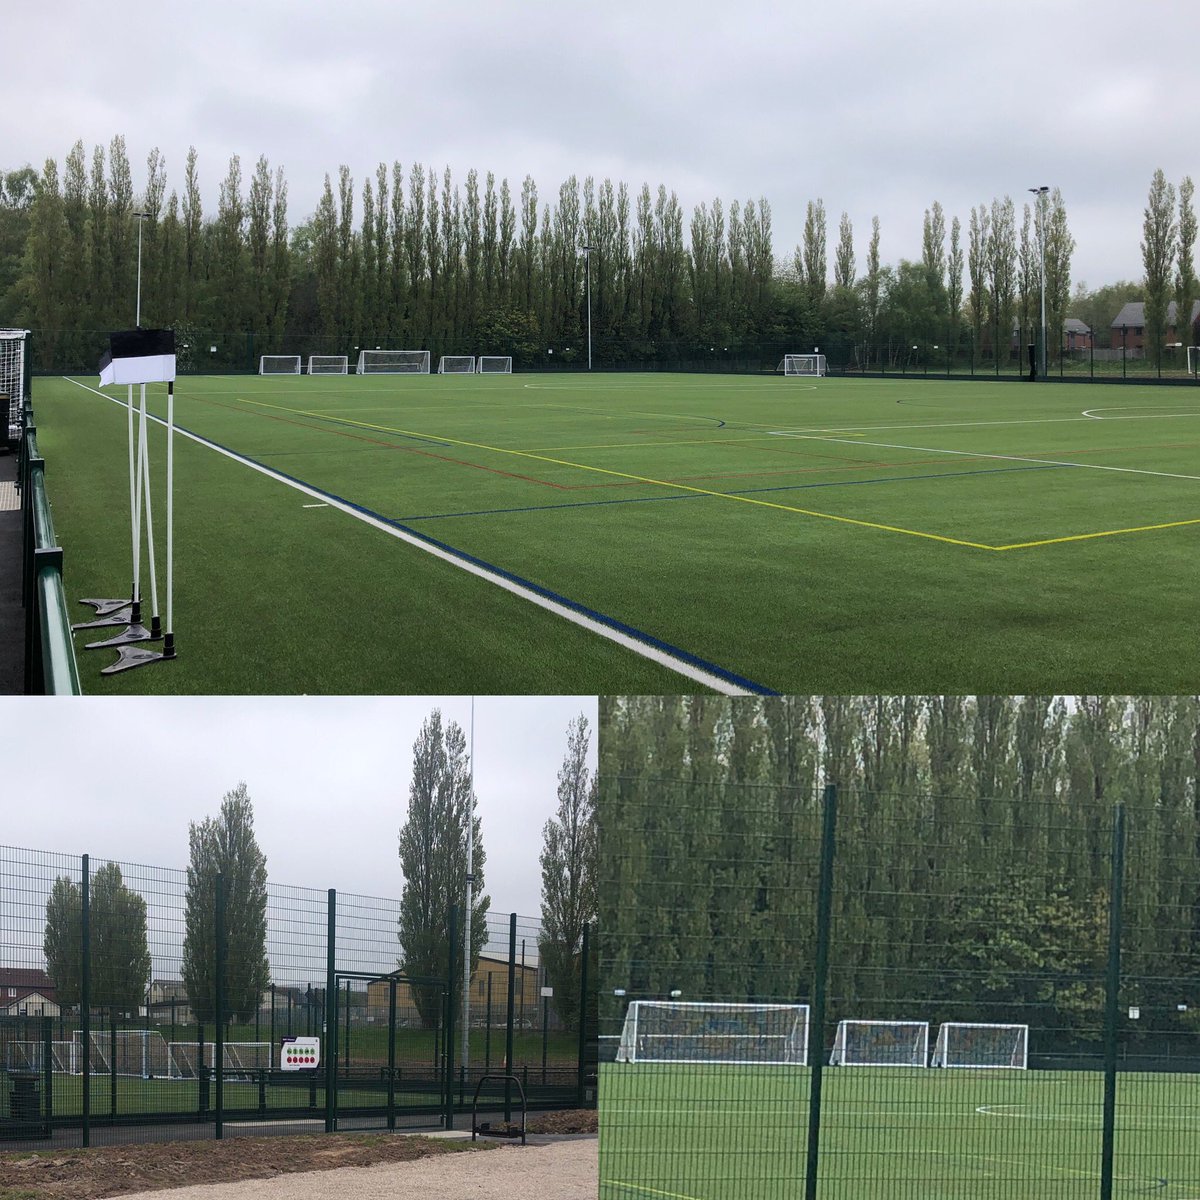 And the handover has been done the @CoalvilleTownFC 3G baby is born huge thanks to all those that made it happen @leicsfa @FootballFoundtn @SISPitches @GlynRennocks @NWLeics @casteleltd @ShaunWaite1986 Bob Stretton Andy Wilkinson @AggregateUK Bardon Hill quarry @MrsMac94735423